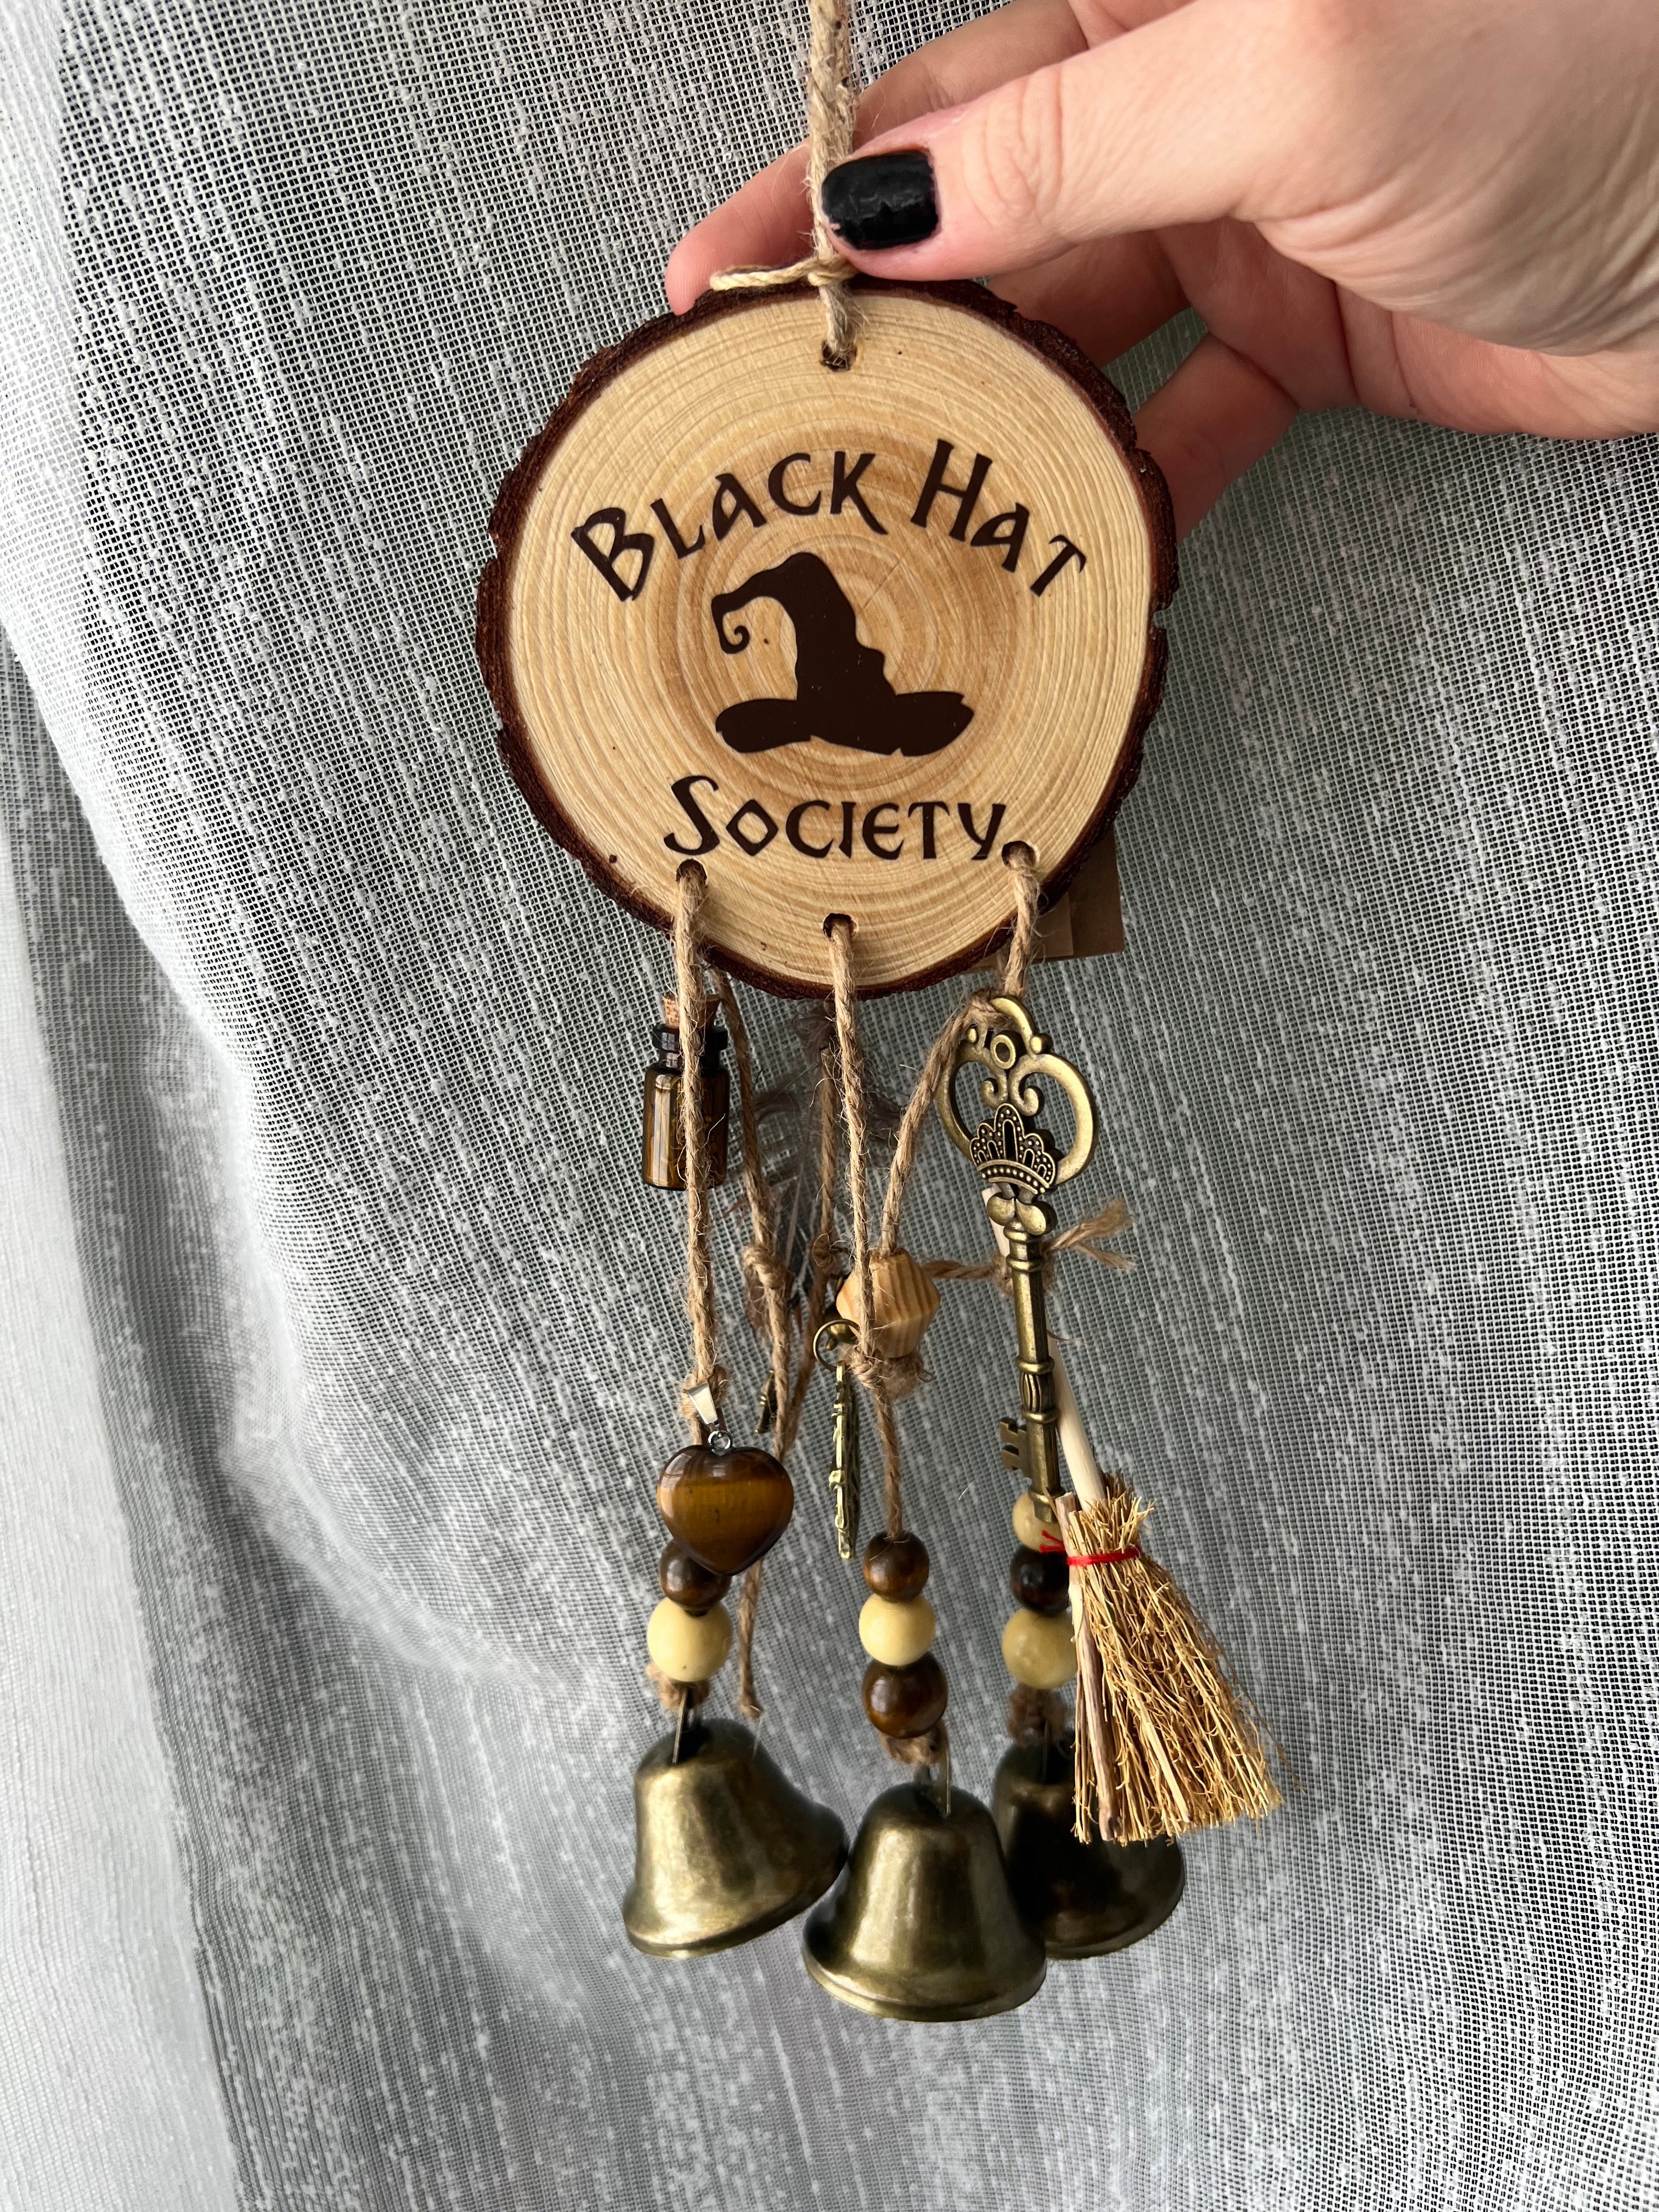 Handmade Witches Bells- Black Hat Society